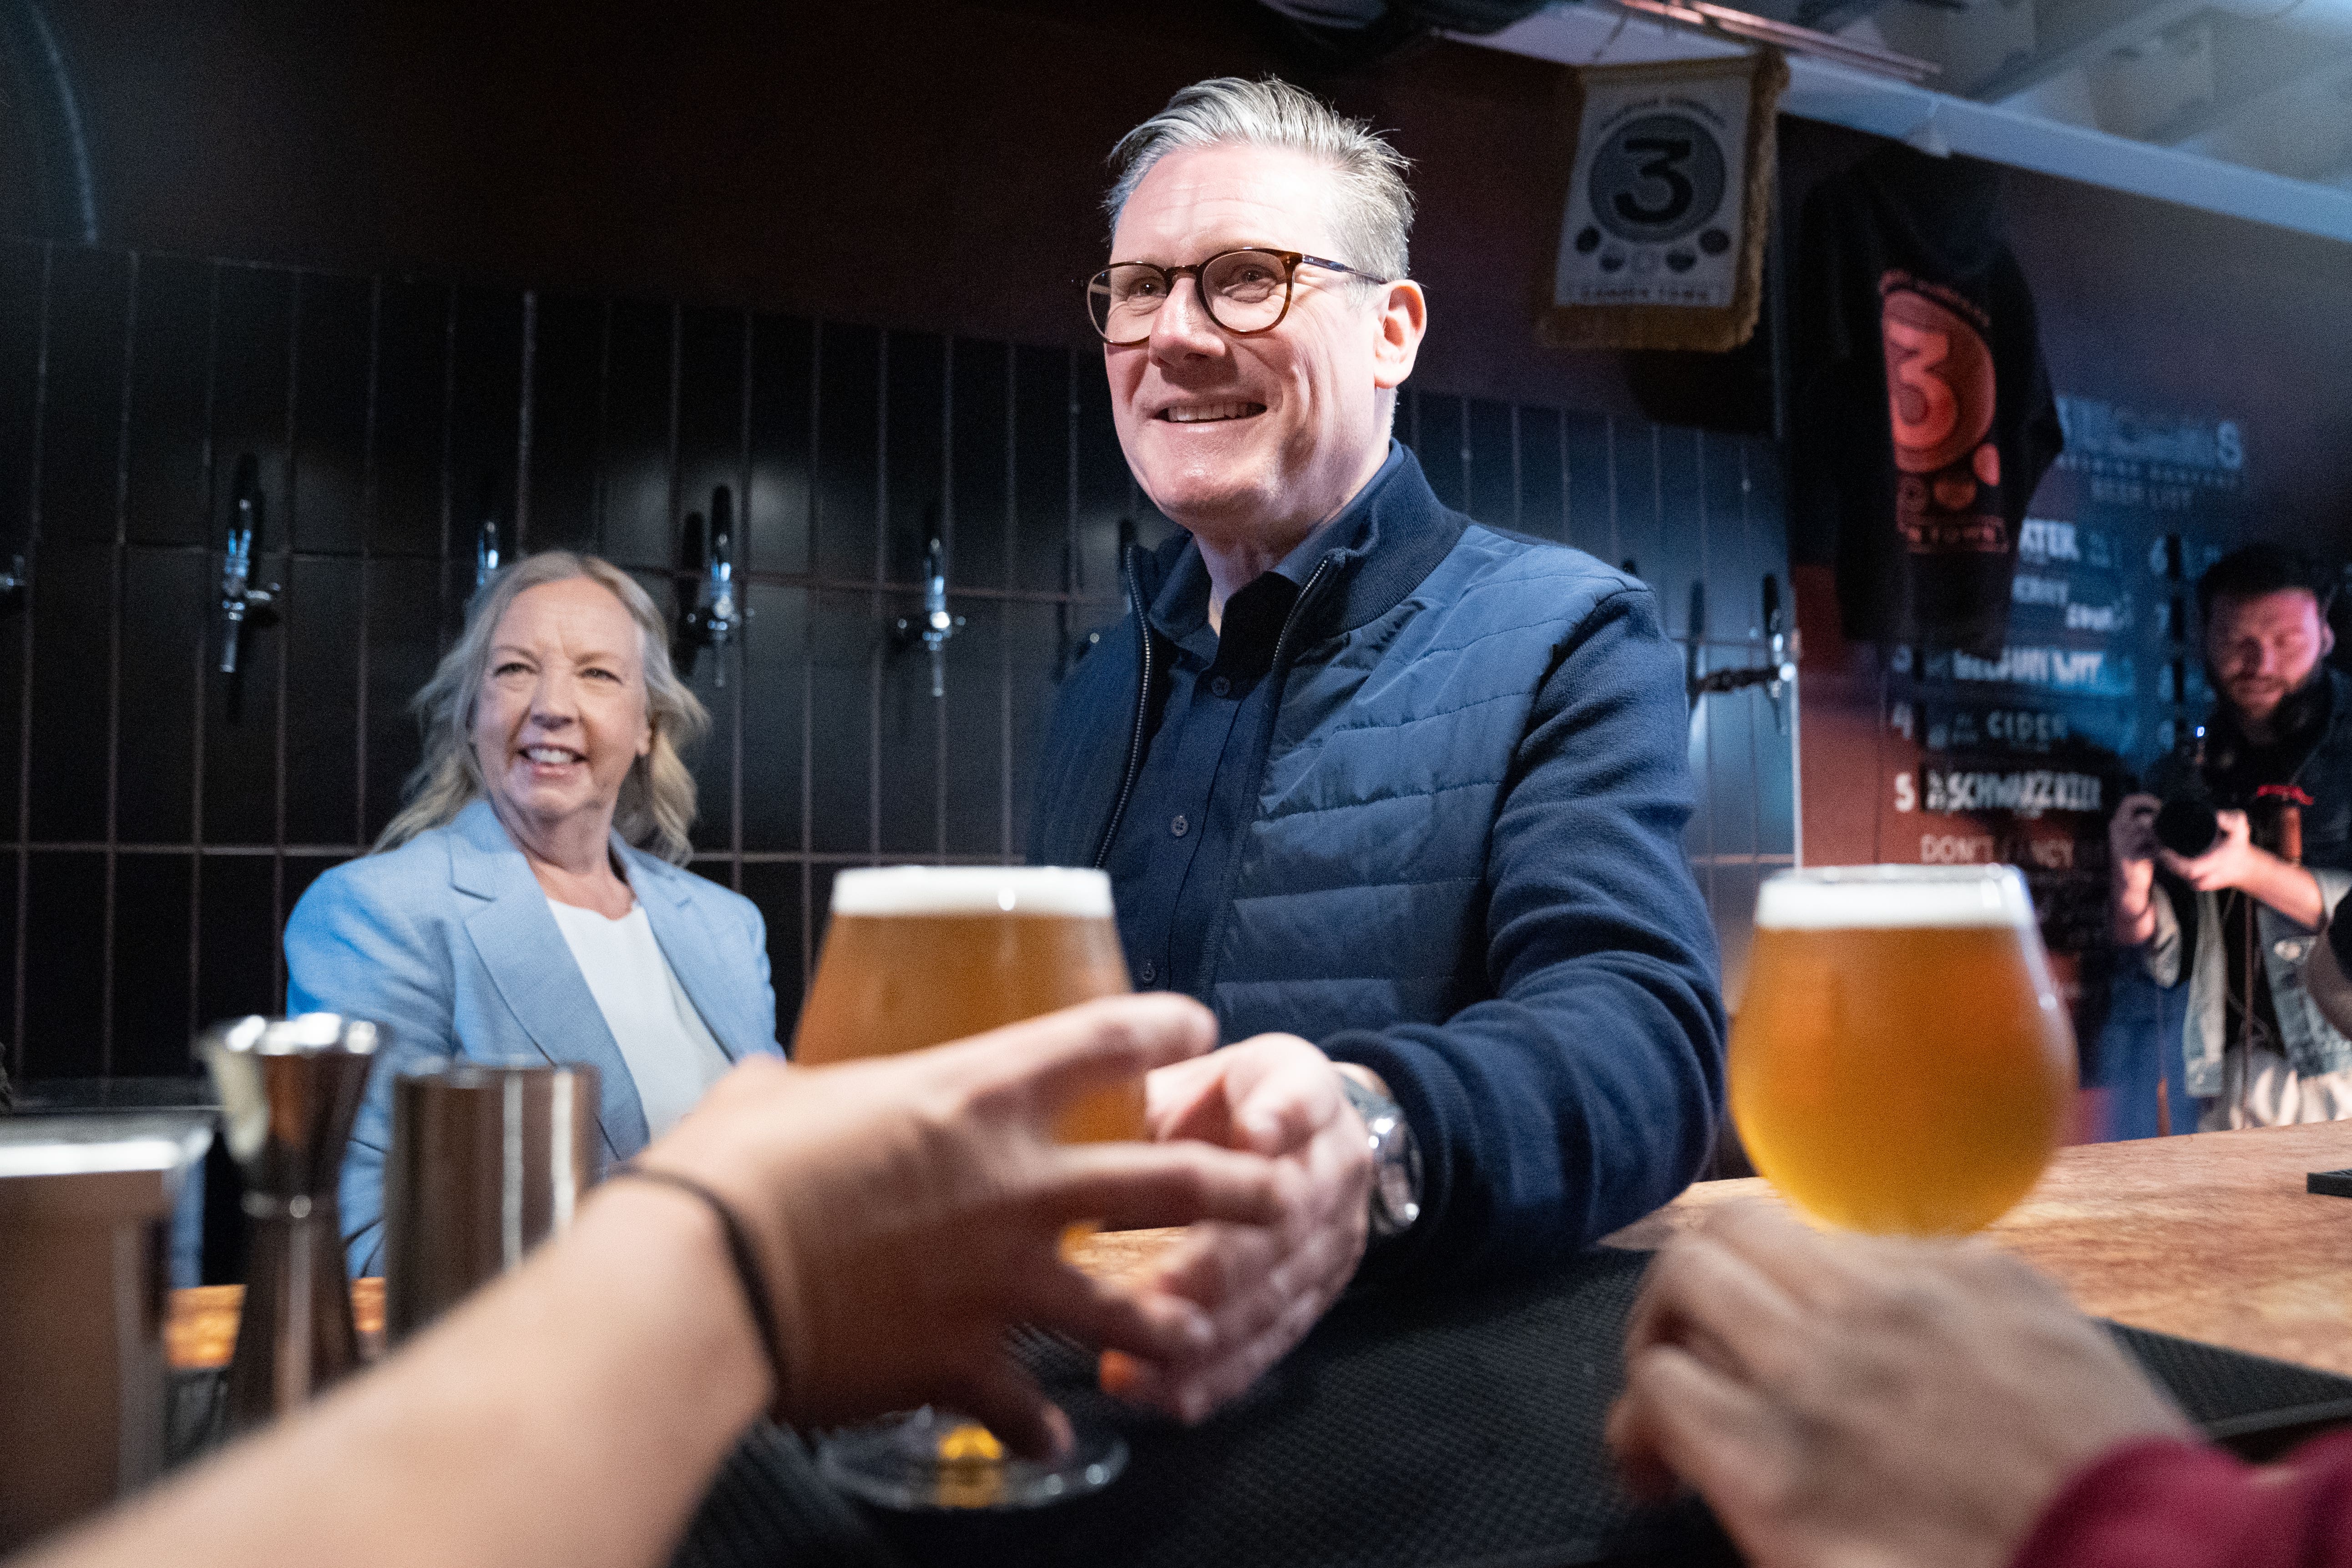 Labour Party leader Sir Keir Starmer visited a brewery in Camden in London while campaigning in the capital ahead of the General Election (Stefan Rousseau/PA)